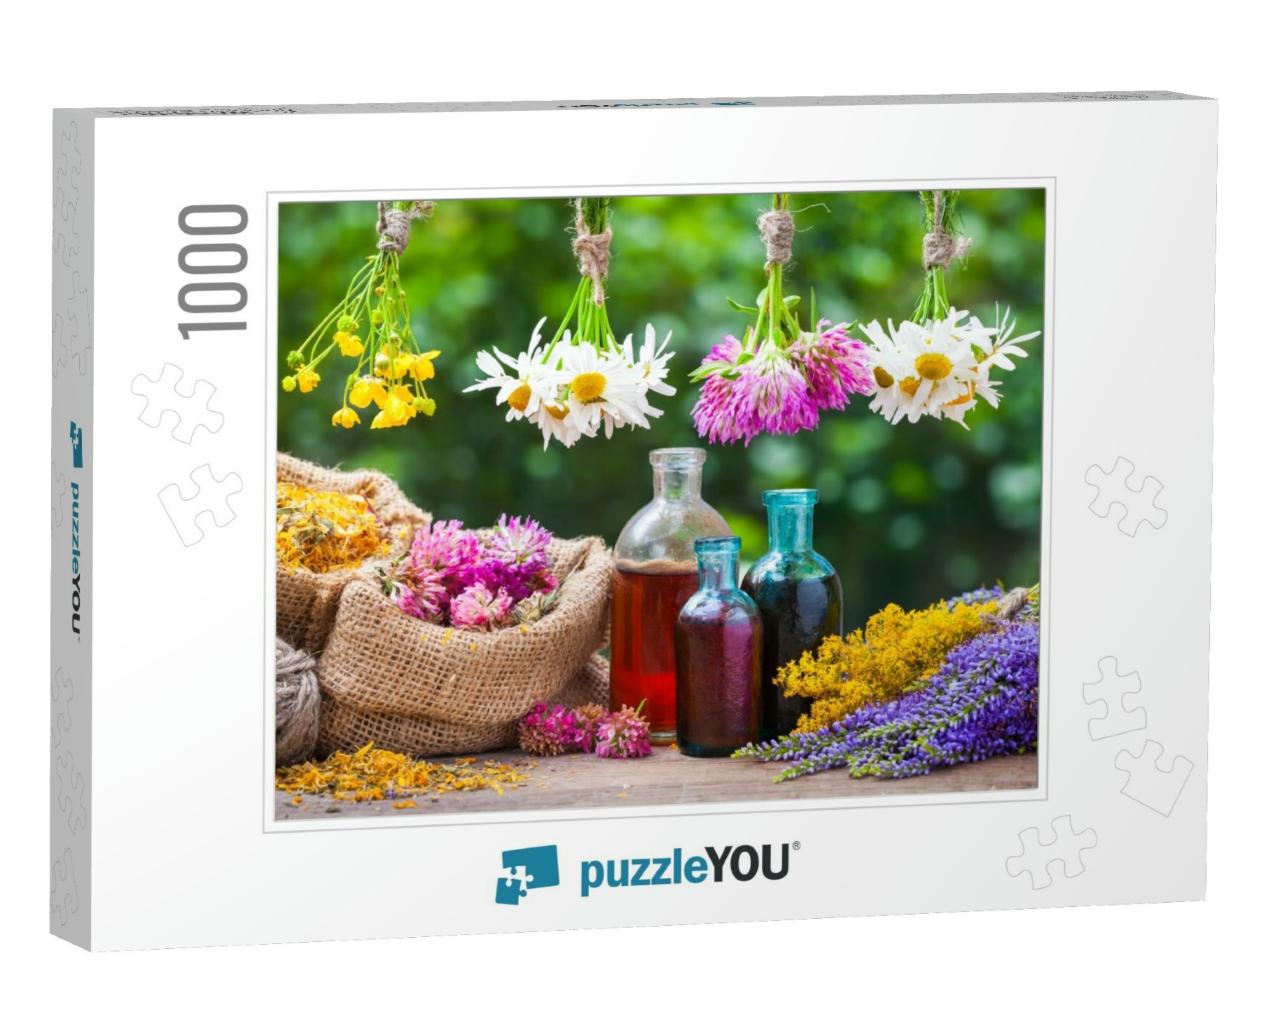 Healing Herbs Bunches, Bottle of Oil or Tincture, Hessian... Jigsaw Puzzle with 1000 pieces